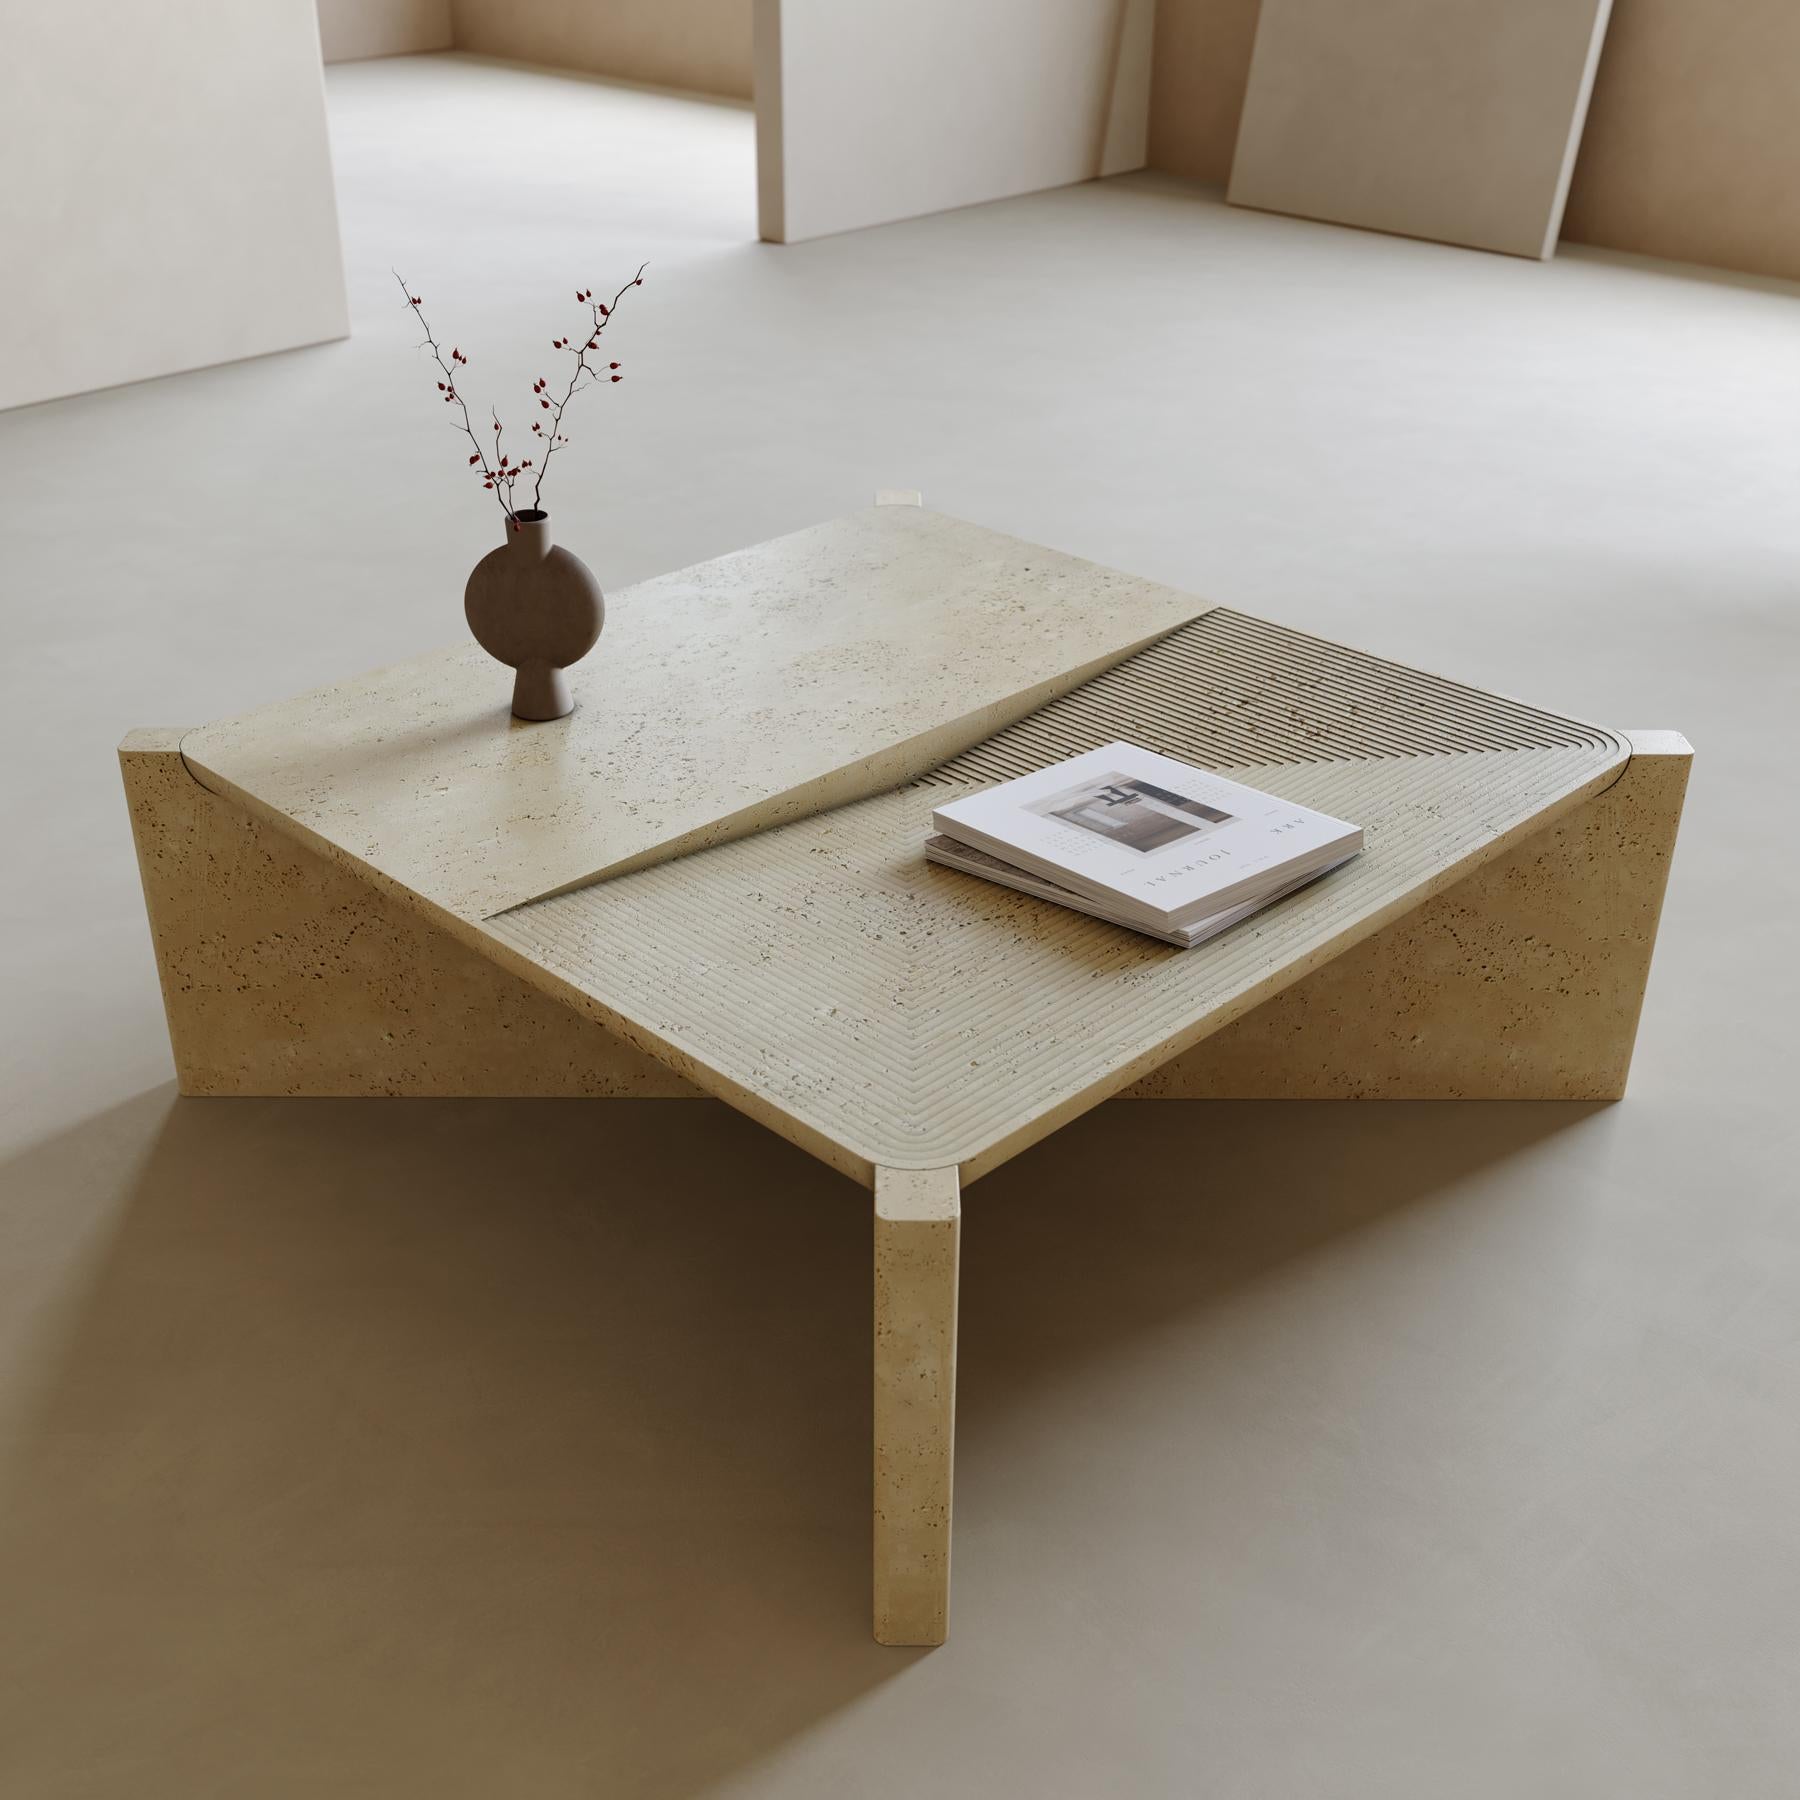 Stone Arkhe No 1 Coffee Table Square Travertine, Modern Sculptural by Fulden Topaloglu For Sale